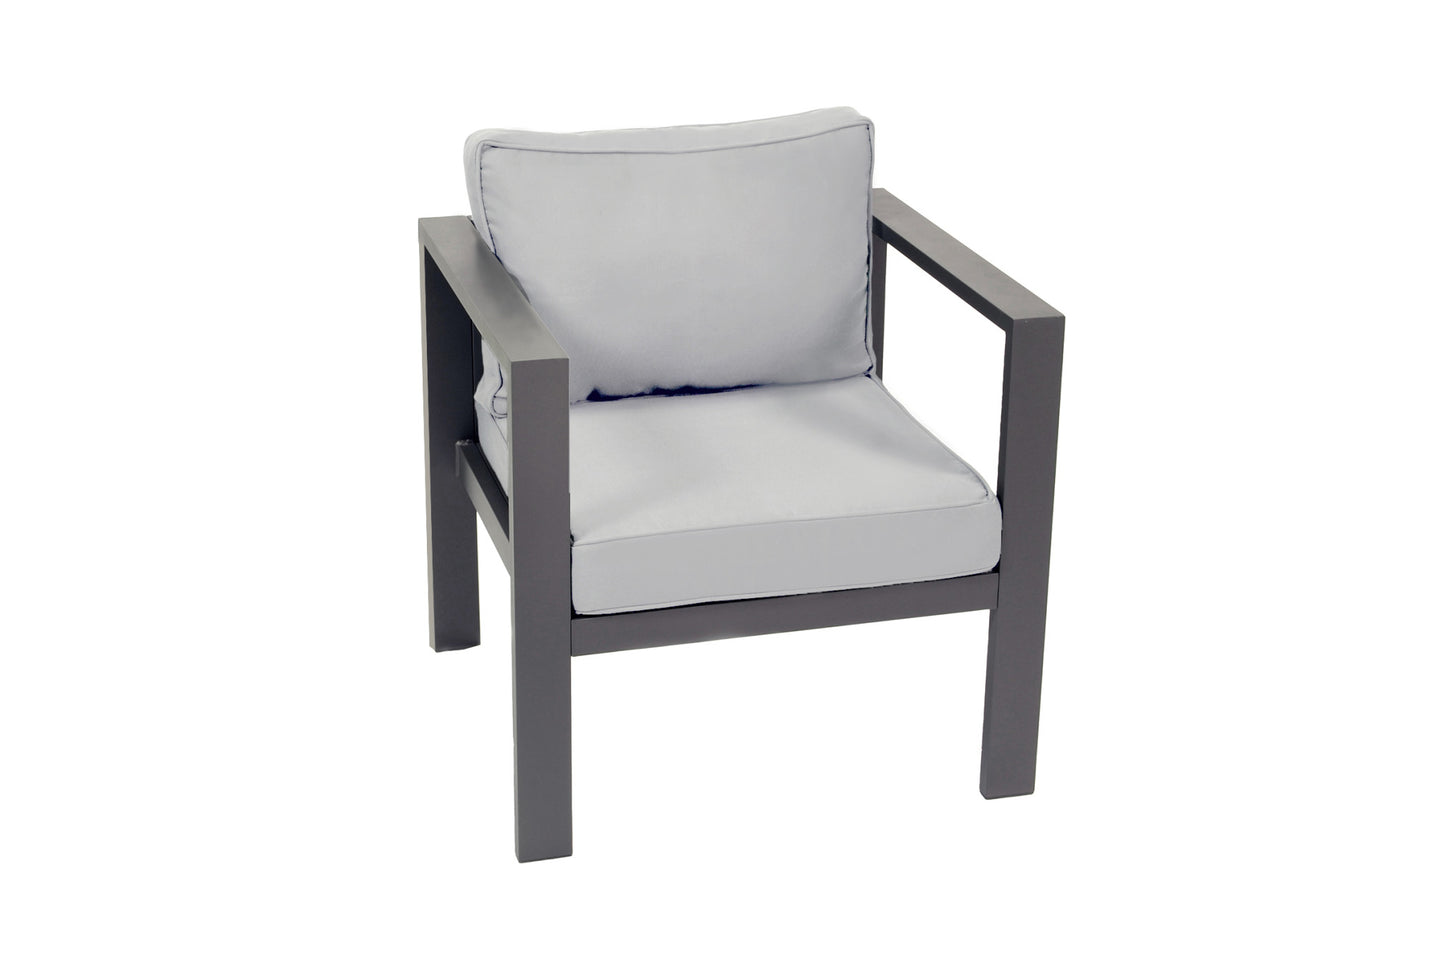 Lakeview Aluminum Club Chair w/ Cushion, Ottoman, and Side Table - Gray